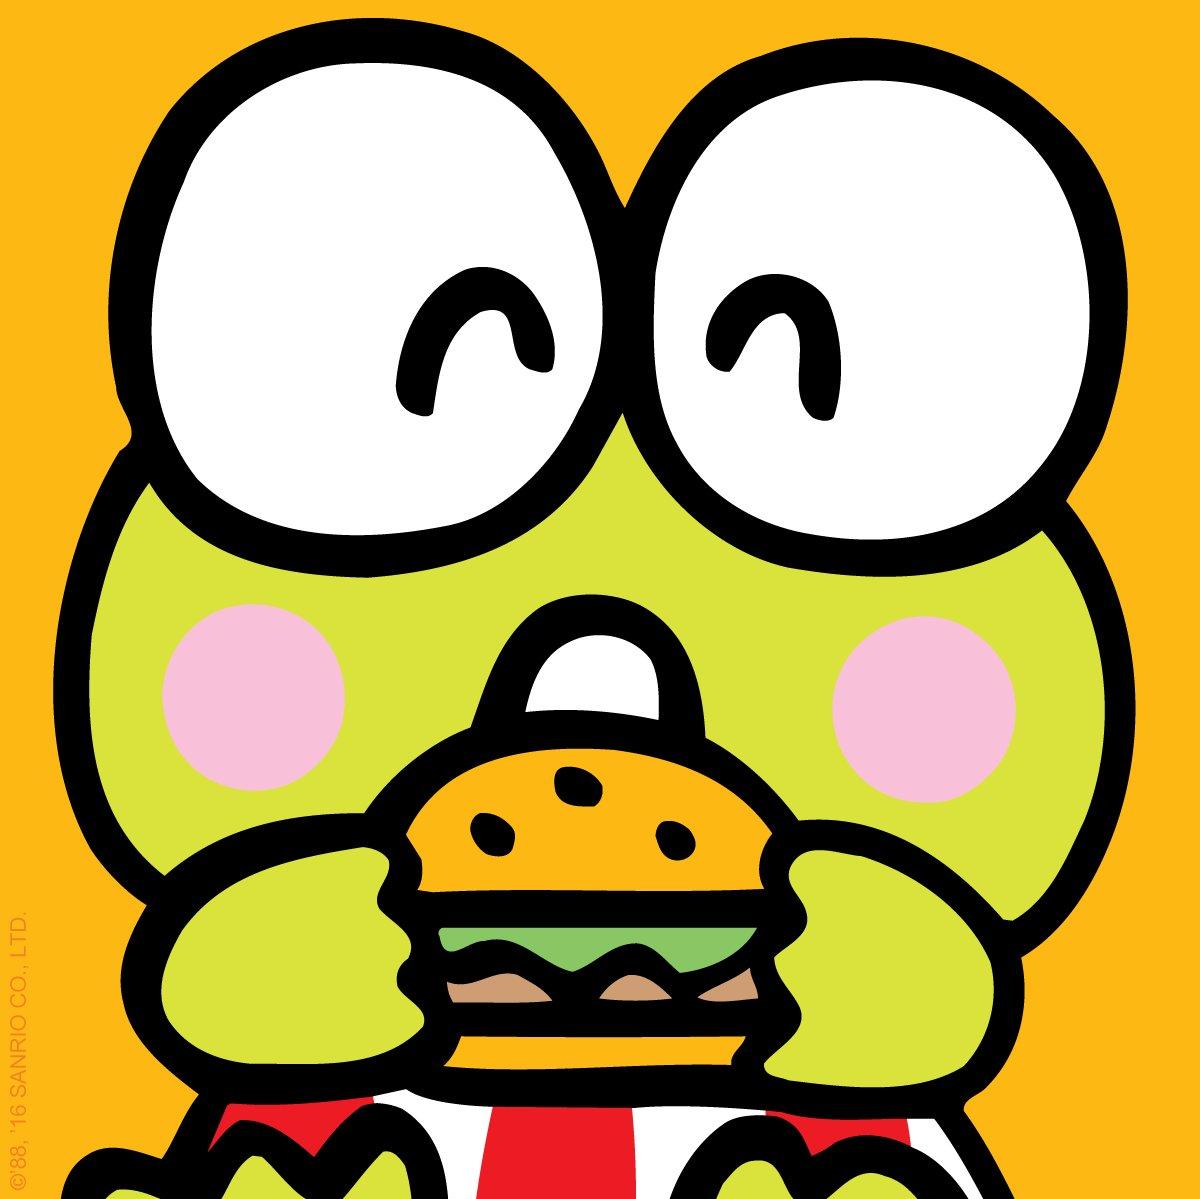 Sanrio on Keroppi is taking a big bite out of